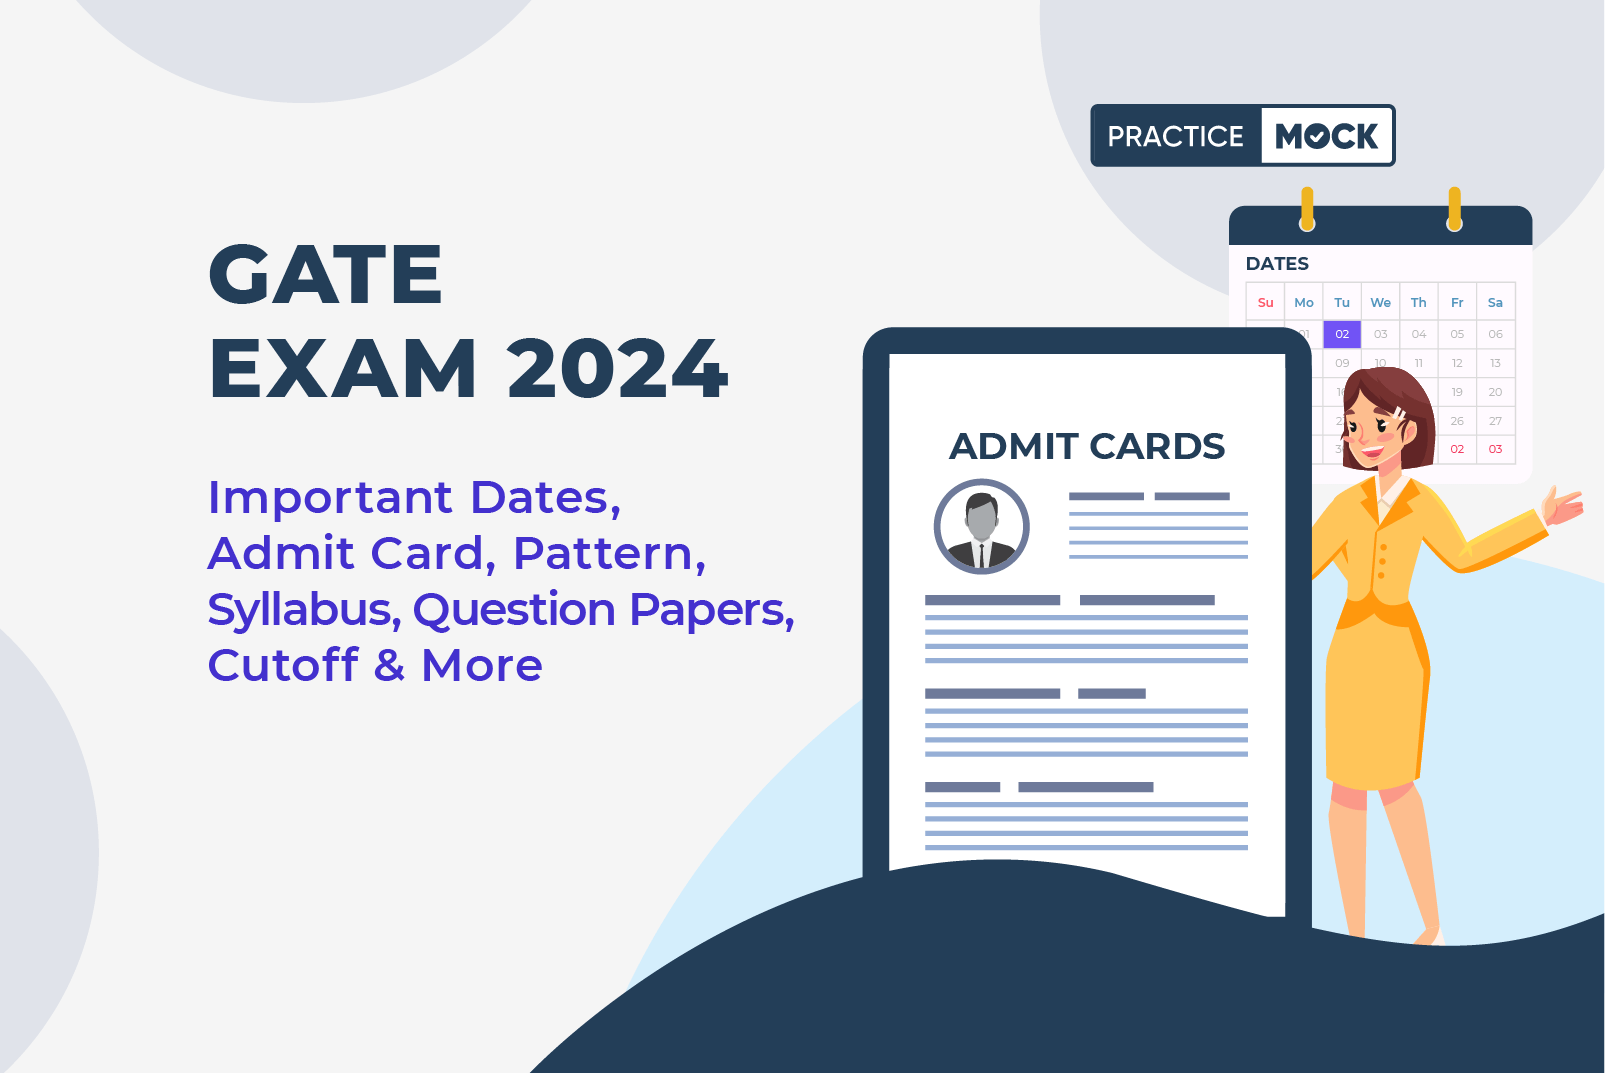 GATE CE 2024 Exam - Imp. Dates, Admit Card, Pattern, Syllabus, Question Papers, Cutoff & More